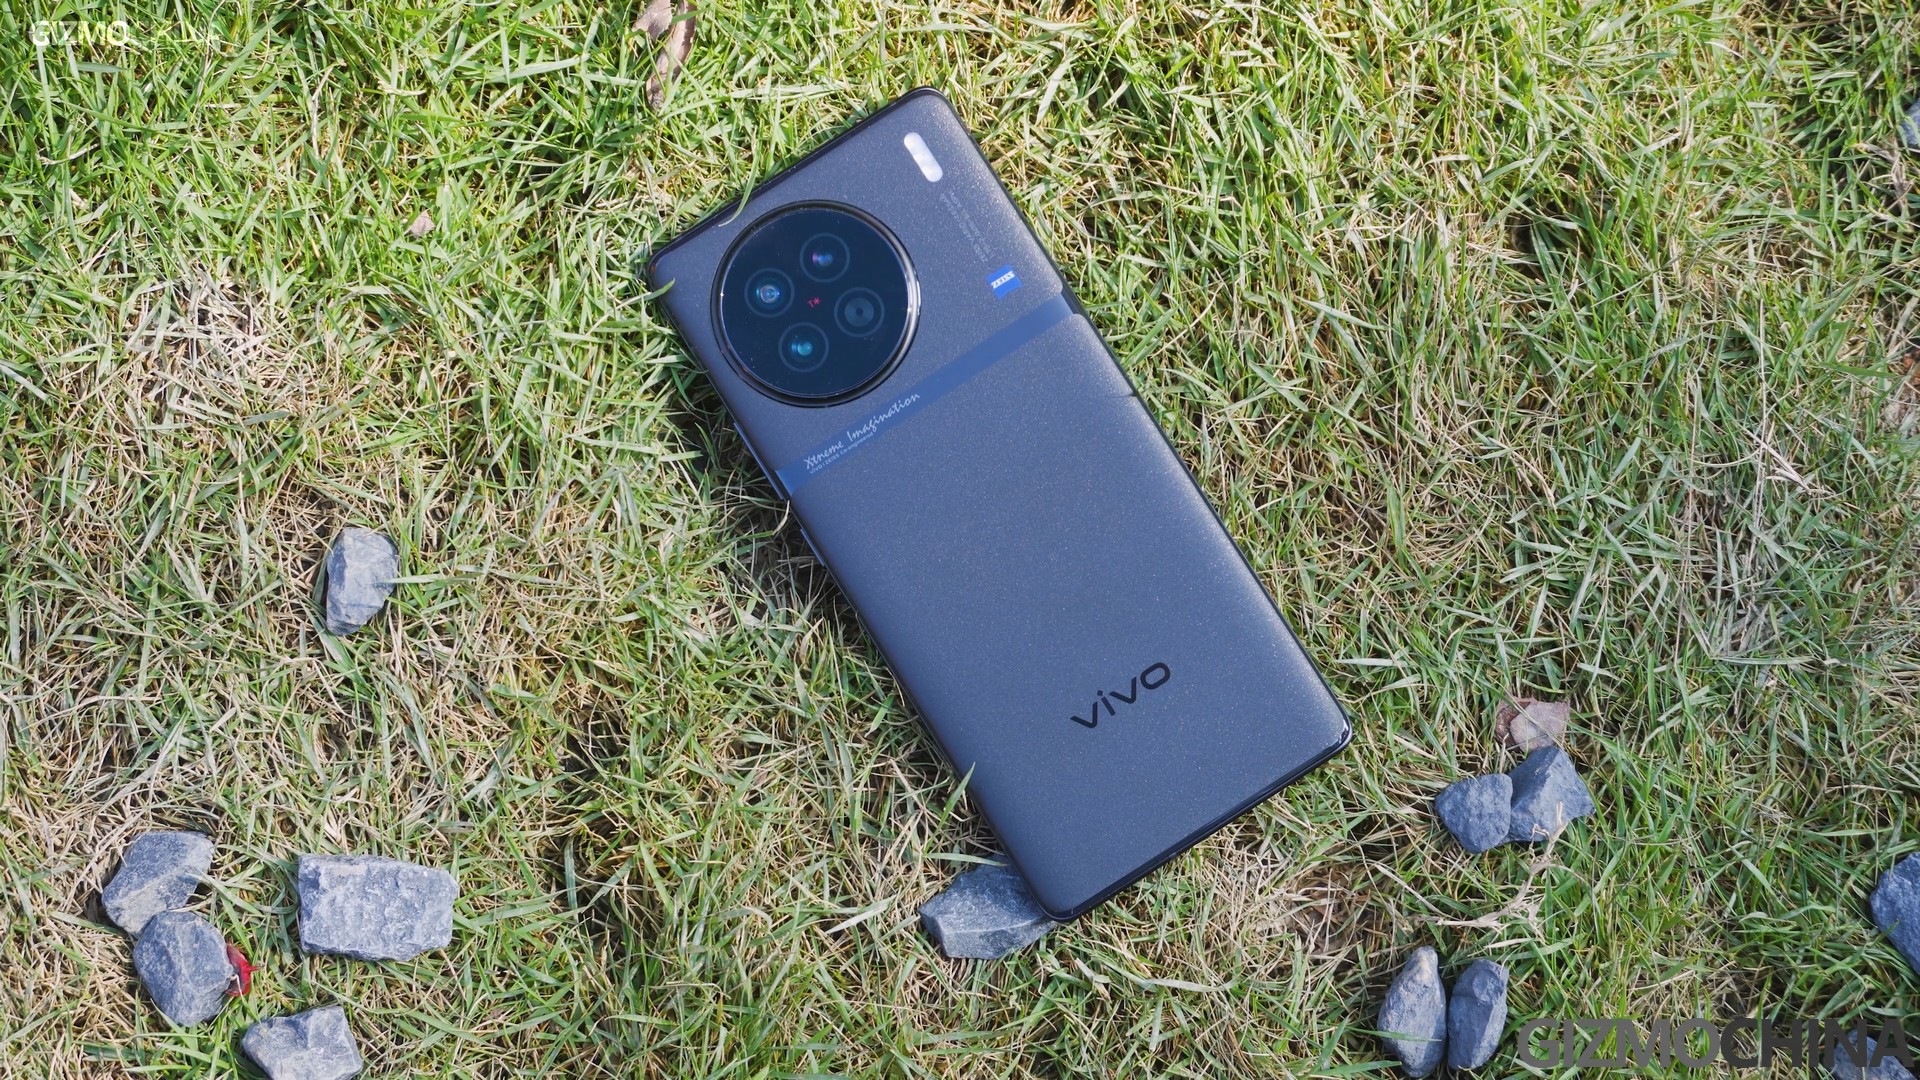 Vivo X90 Pro Review: Well-Balanced With A Few Quirks